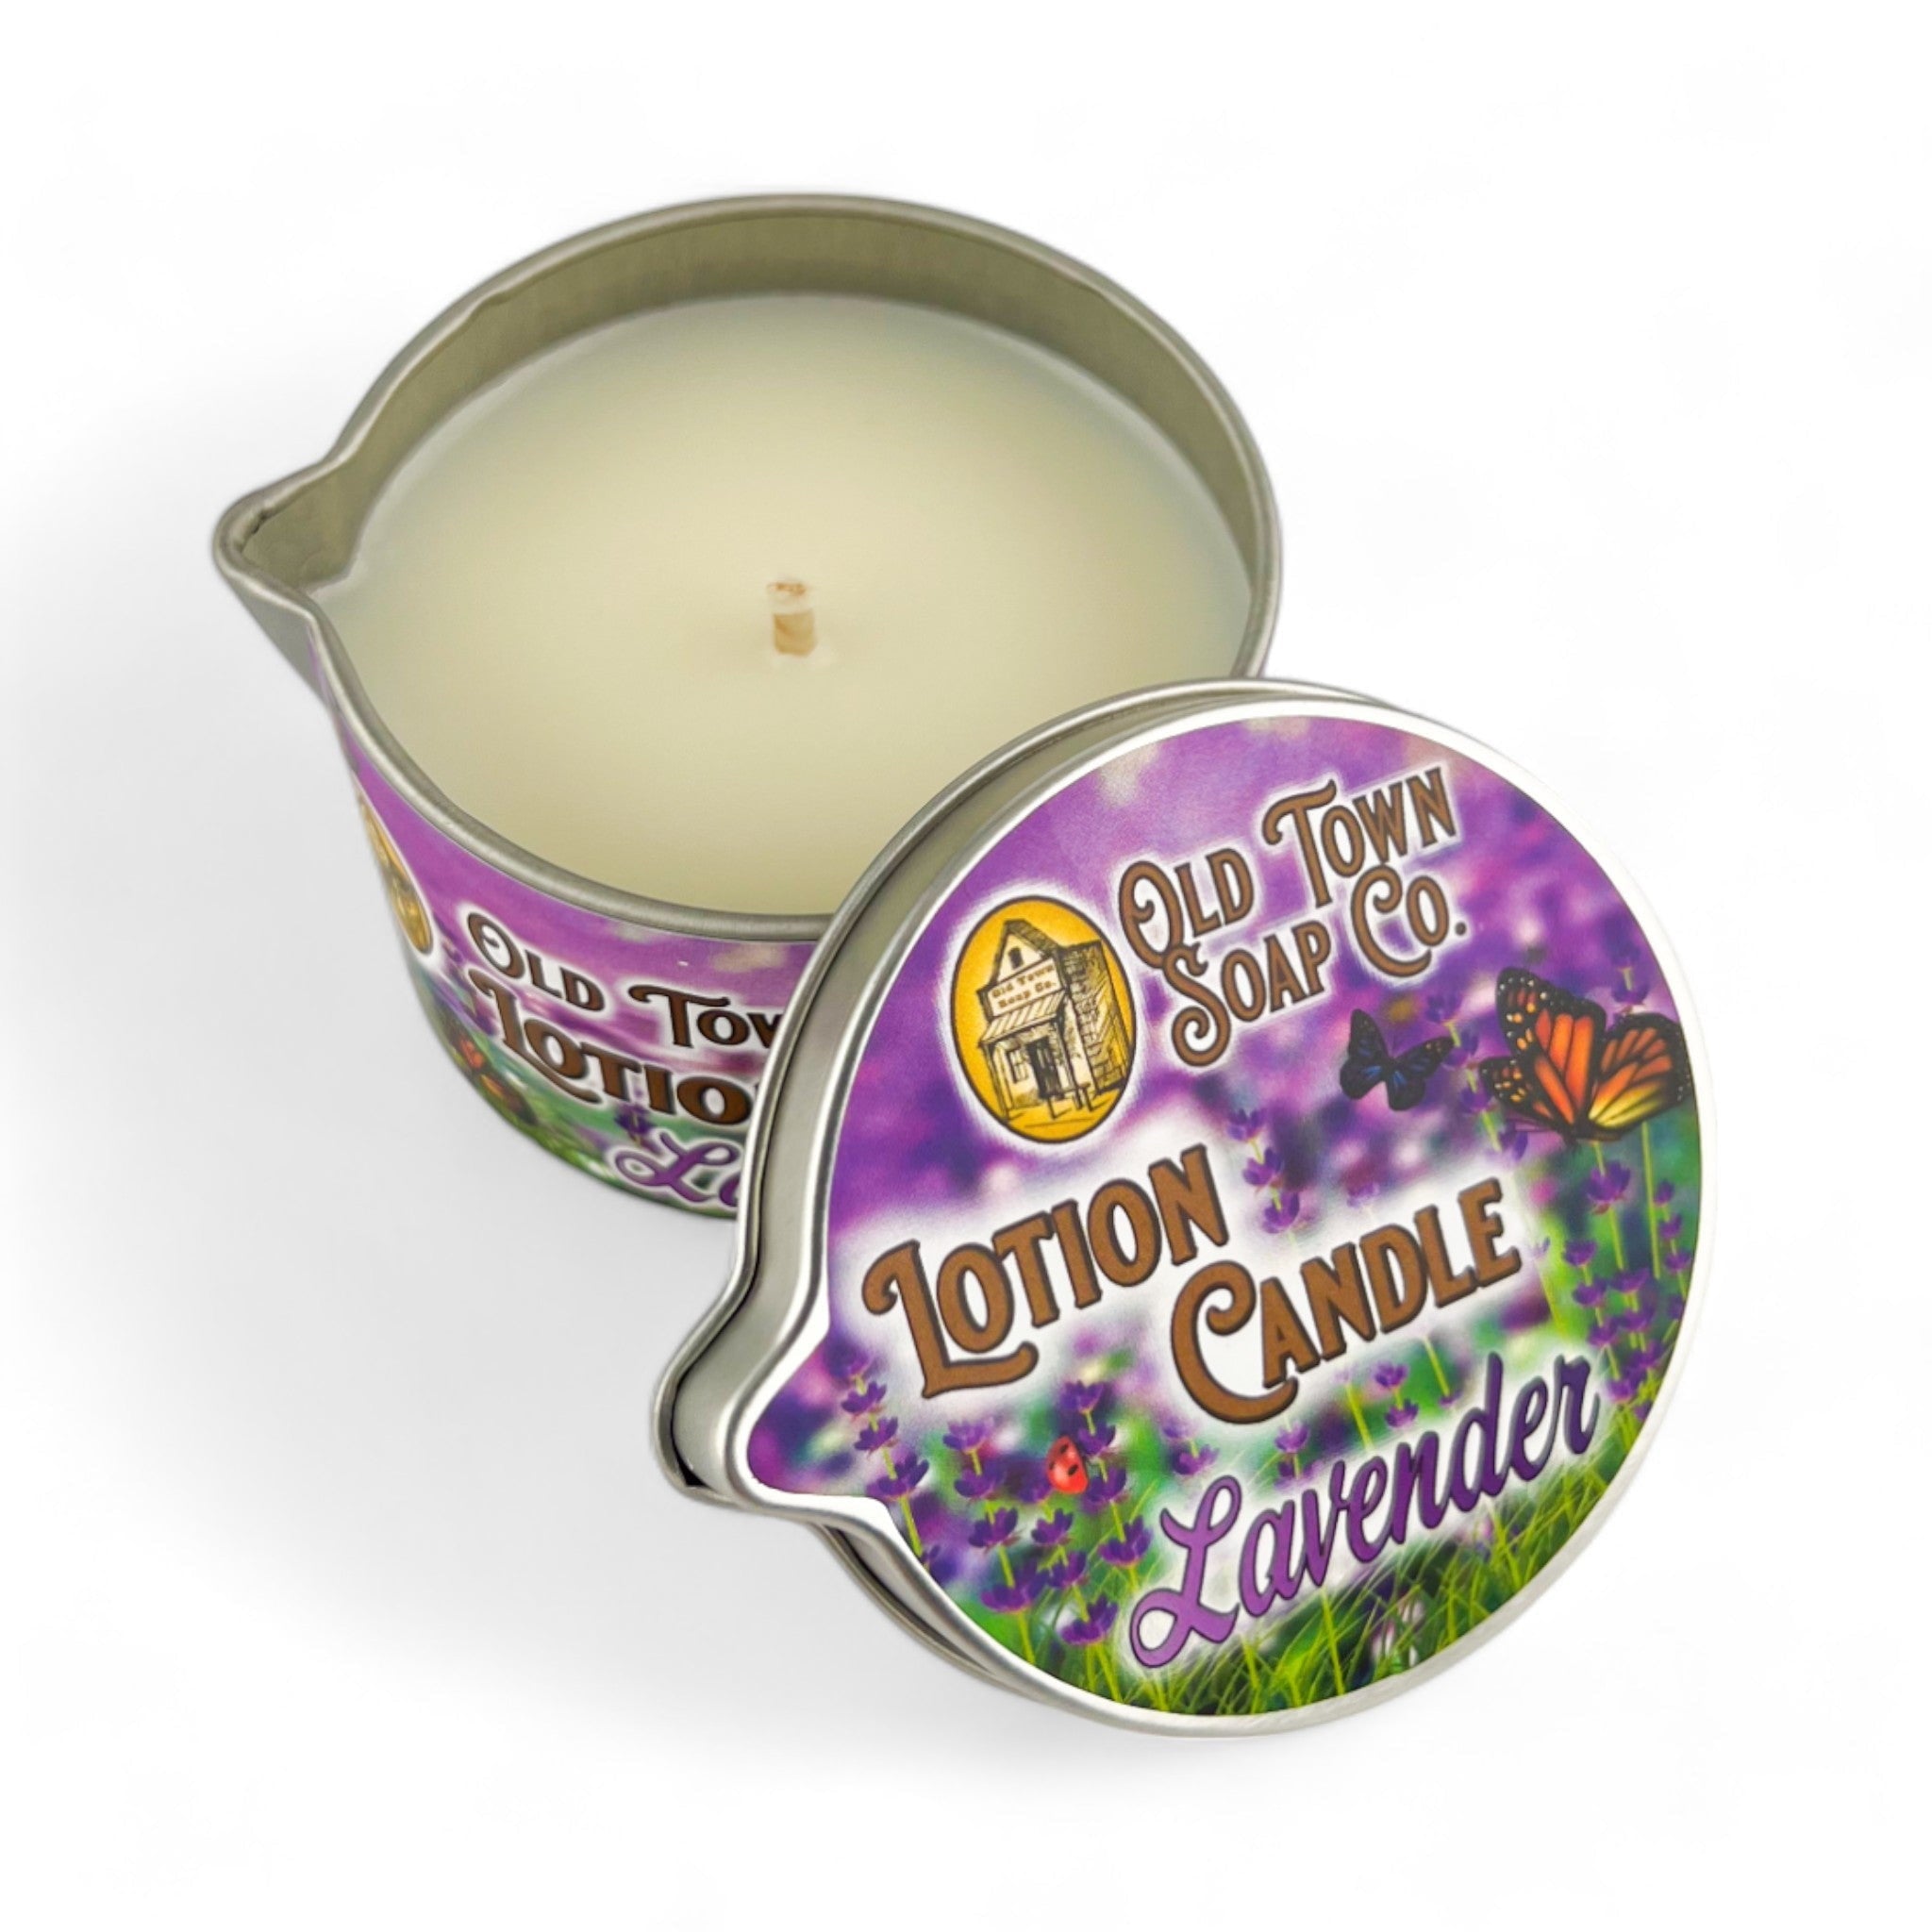 Lavender -Lotion Candle - Old Town Soap Co.